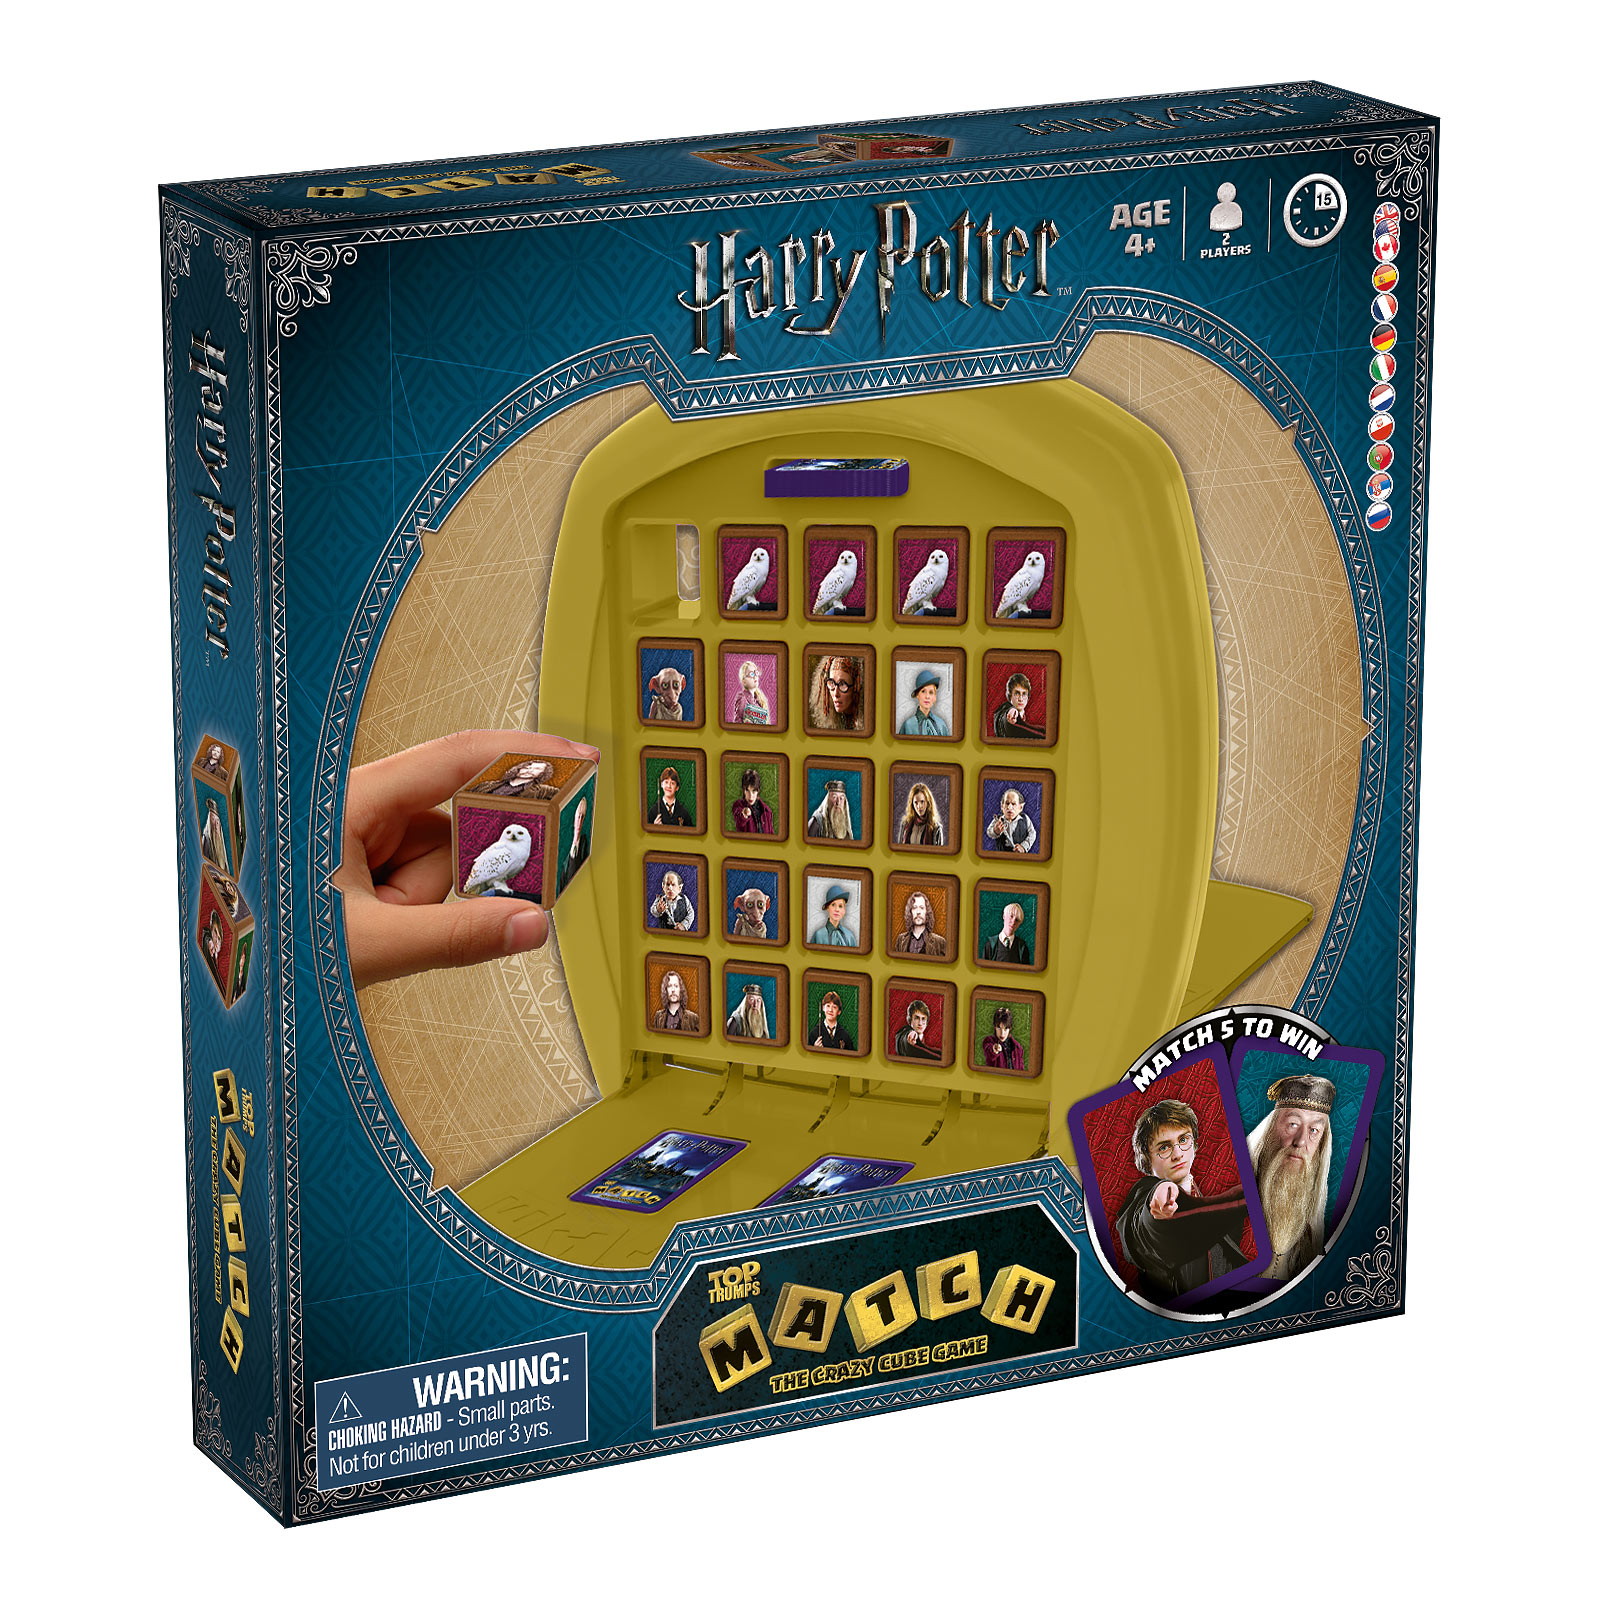 Harry Potter - Top Trumps Match Dice Game